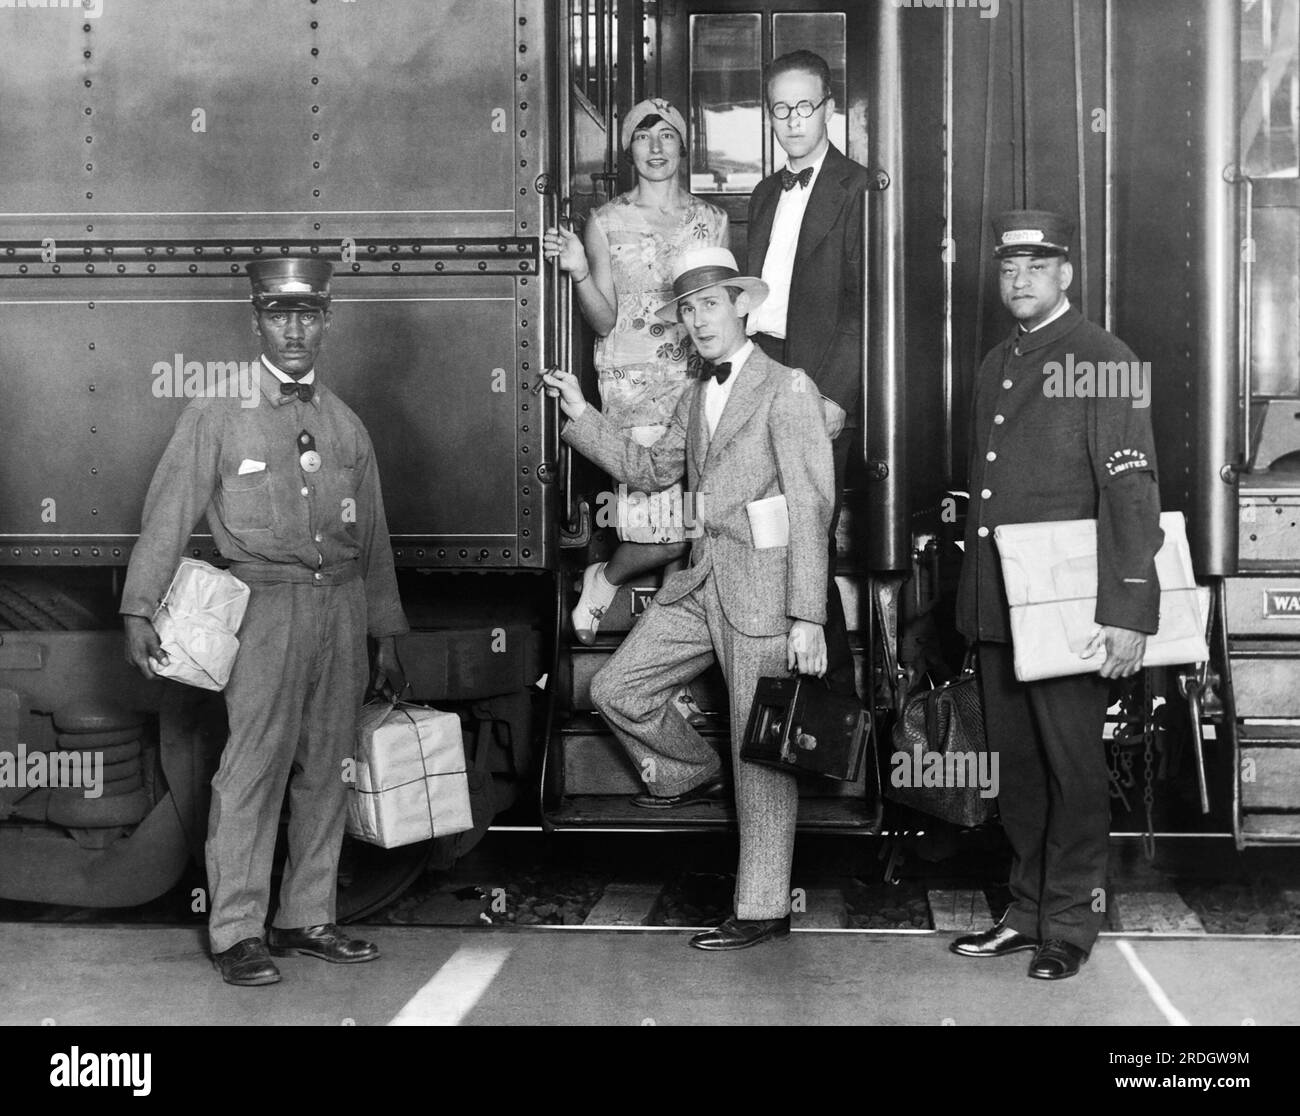 Washington, D.C.:  July 29, 1929 Leo Hessler, Underwood & Underwood photographer, boards the Airway Limited train for Columbus where he will board Transcontinental Air Transport's great trimotored planes to photograph the big businessmen and beautiful society women who are taking advantage of that time saving travel. Stock Photo